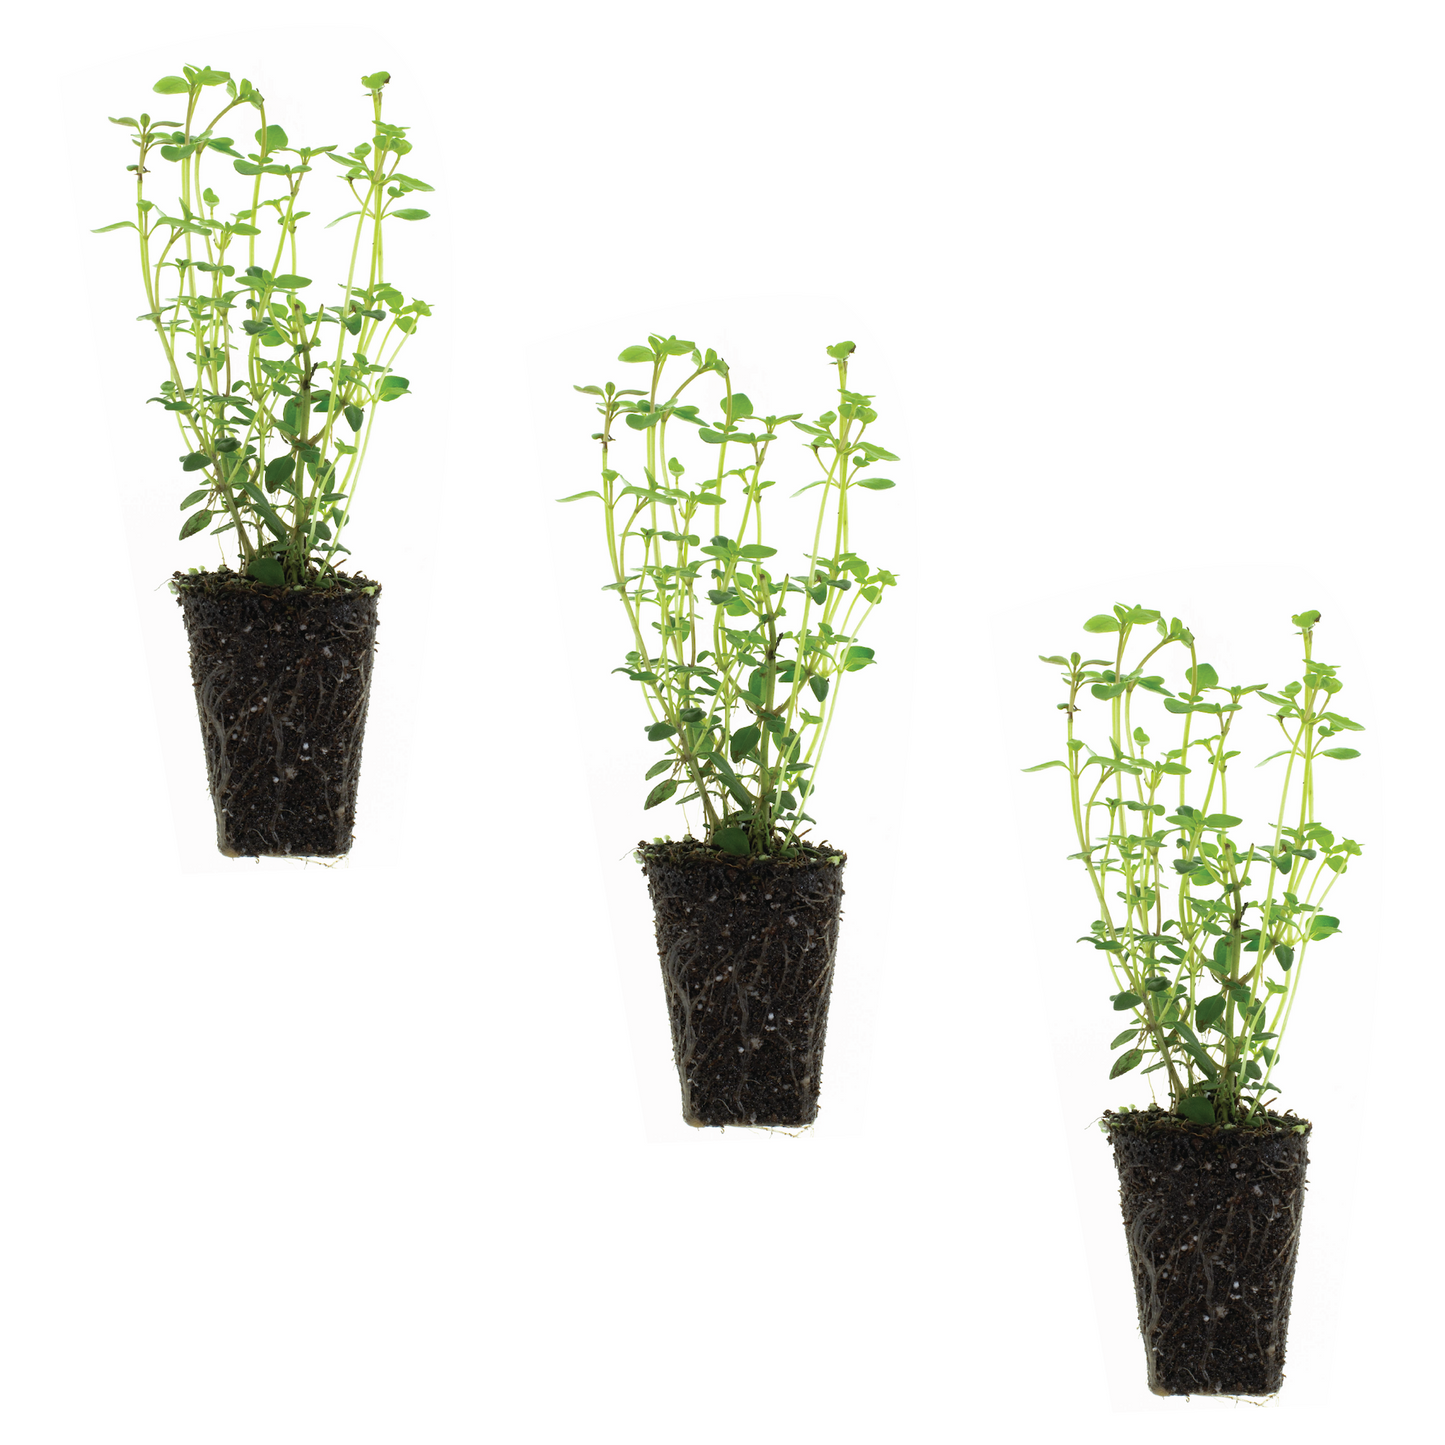 Thyme English Plantlings Live Baby Plants 1-3in., 3-Pack